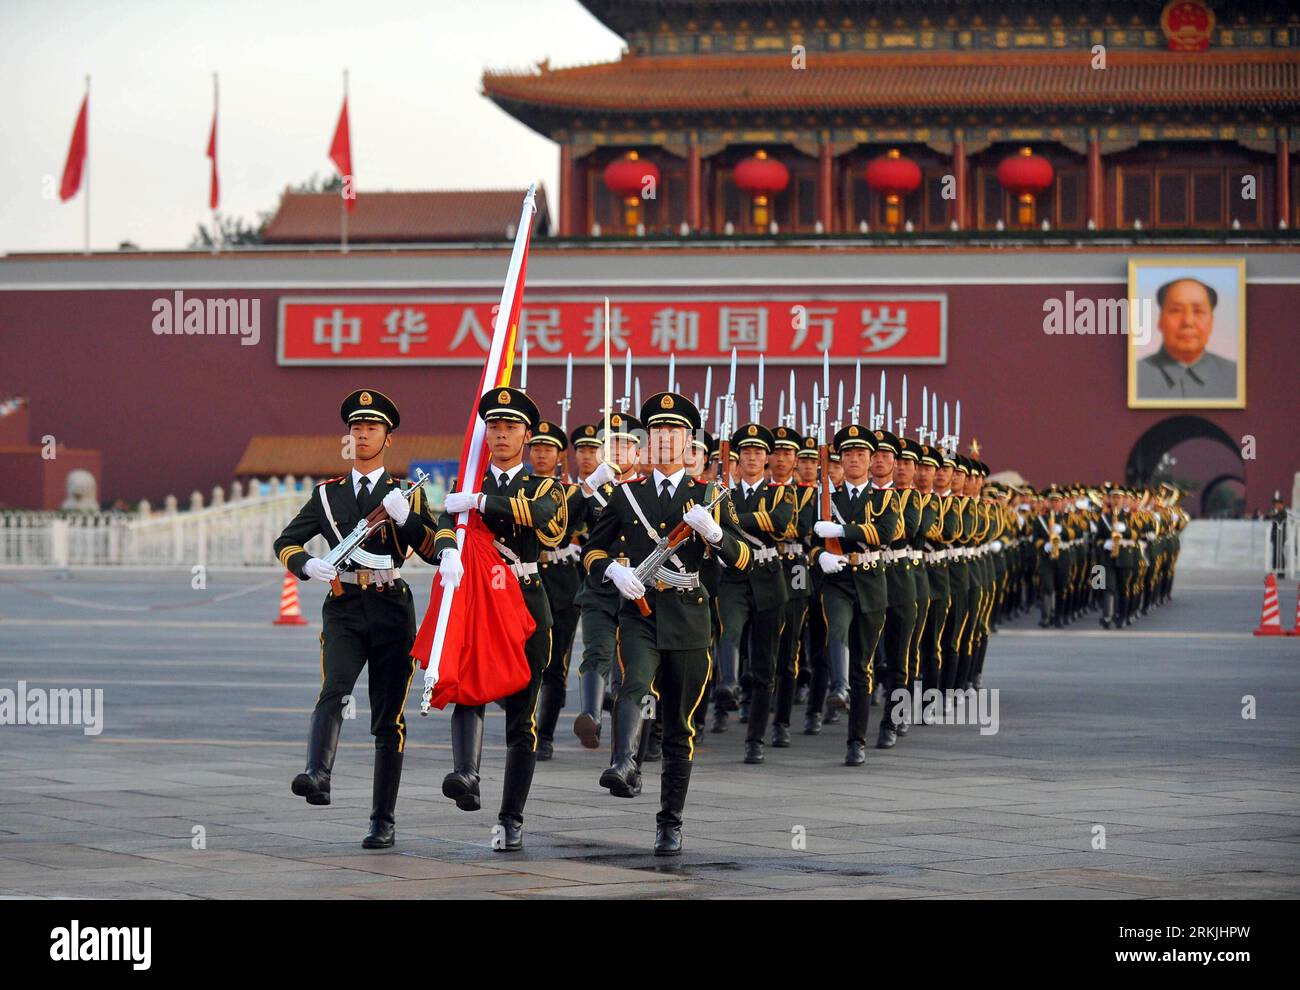 Bildnummer: 56138813  Datum: 01.10.2011  Copyright: imago/Xinhua (111001) -- BEIJING, Oct. 1, 2011 (Xinhua) -- Chinese national flag guards escort the flag across the Chang an Avenue in Beijing, capital of China, Oct. 1, 2011. More than 120,000 gathered at the Tian anmen Square to watch the national flag raising ceremony at dawn on Oct. 1, in celebration of the 62th anniversary of the founding of the People s Republic of China. (Xinhua/Luo Xiaoguang) (ly) CHINA-NATIONAL FLAG RAISING-NATIONAL DAY (CN) PUBLICATIONxNOTxINxCHN Gesellschaft Militär Fahnenappell Fahne Nationalfahne Appell Feiertag N Stock Photo